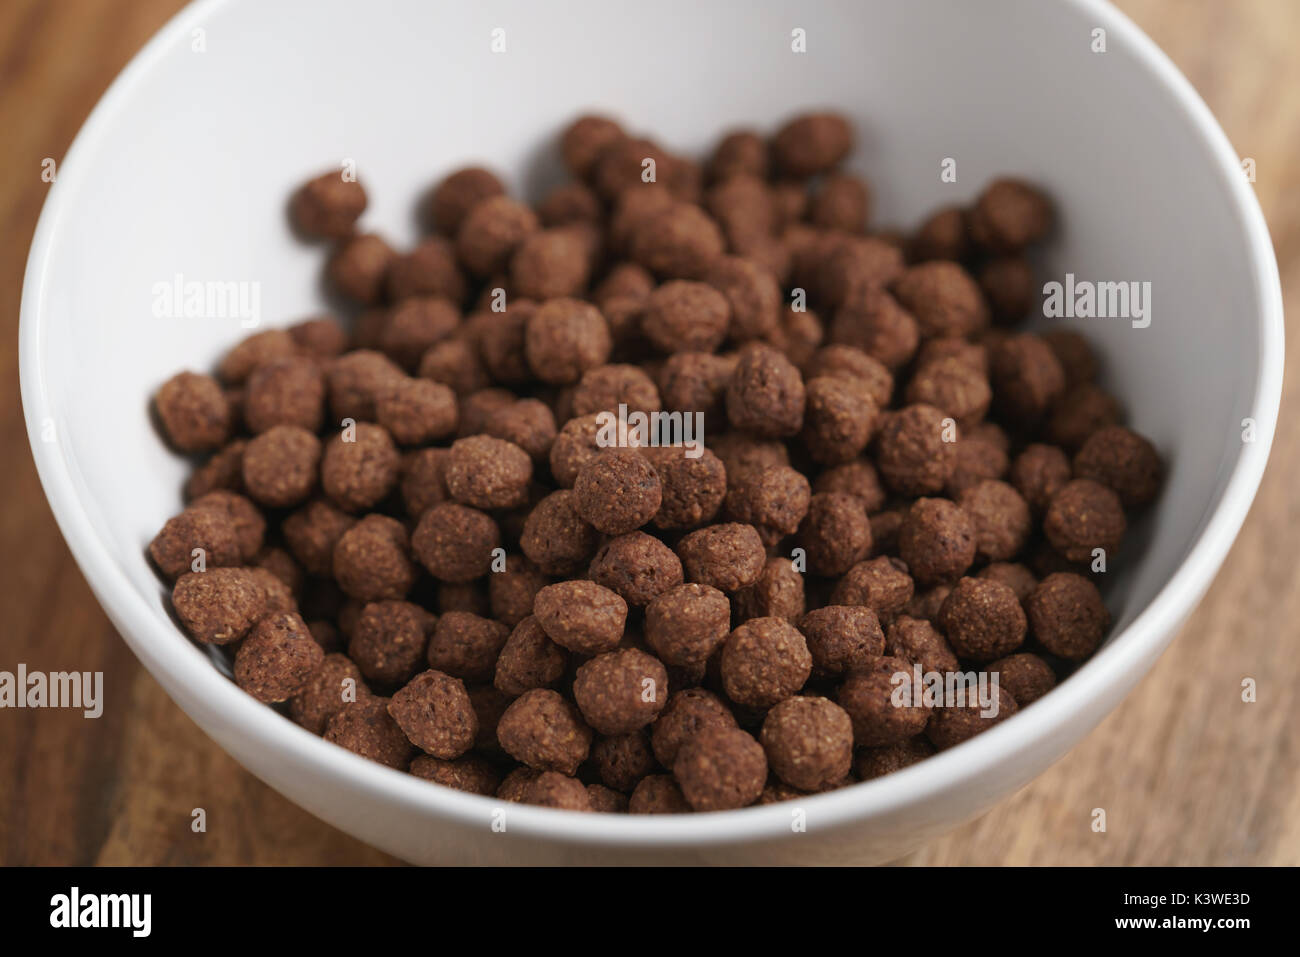 Star shaped honey coated cereal in a white bowl and wooden